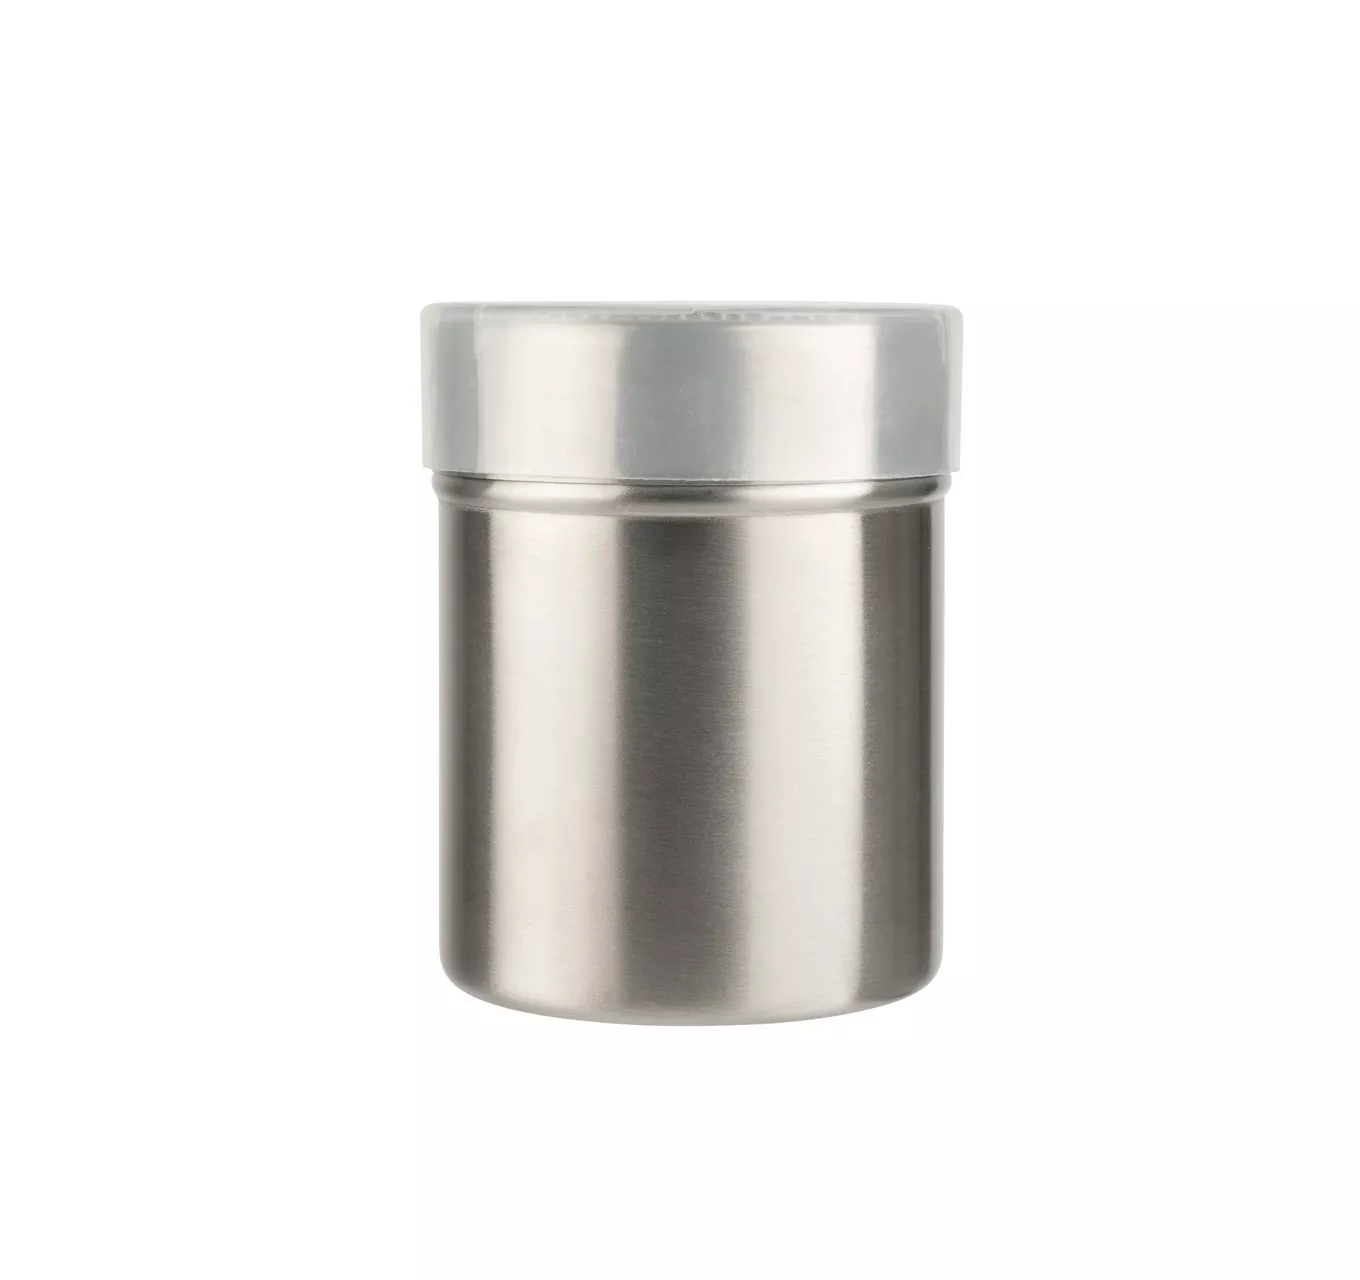 Cocoa Shaker - Stainless Steel